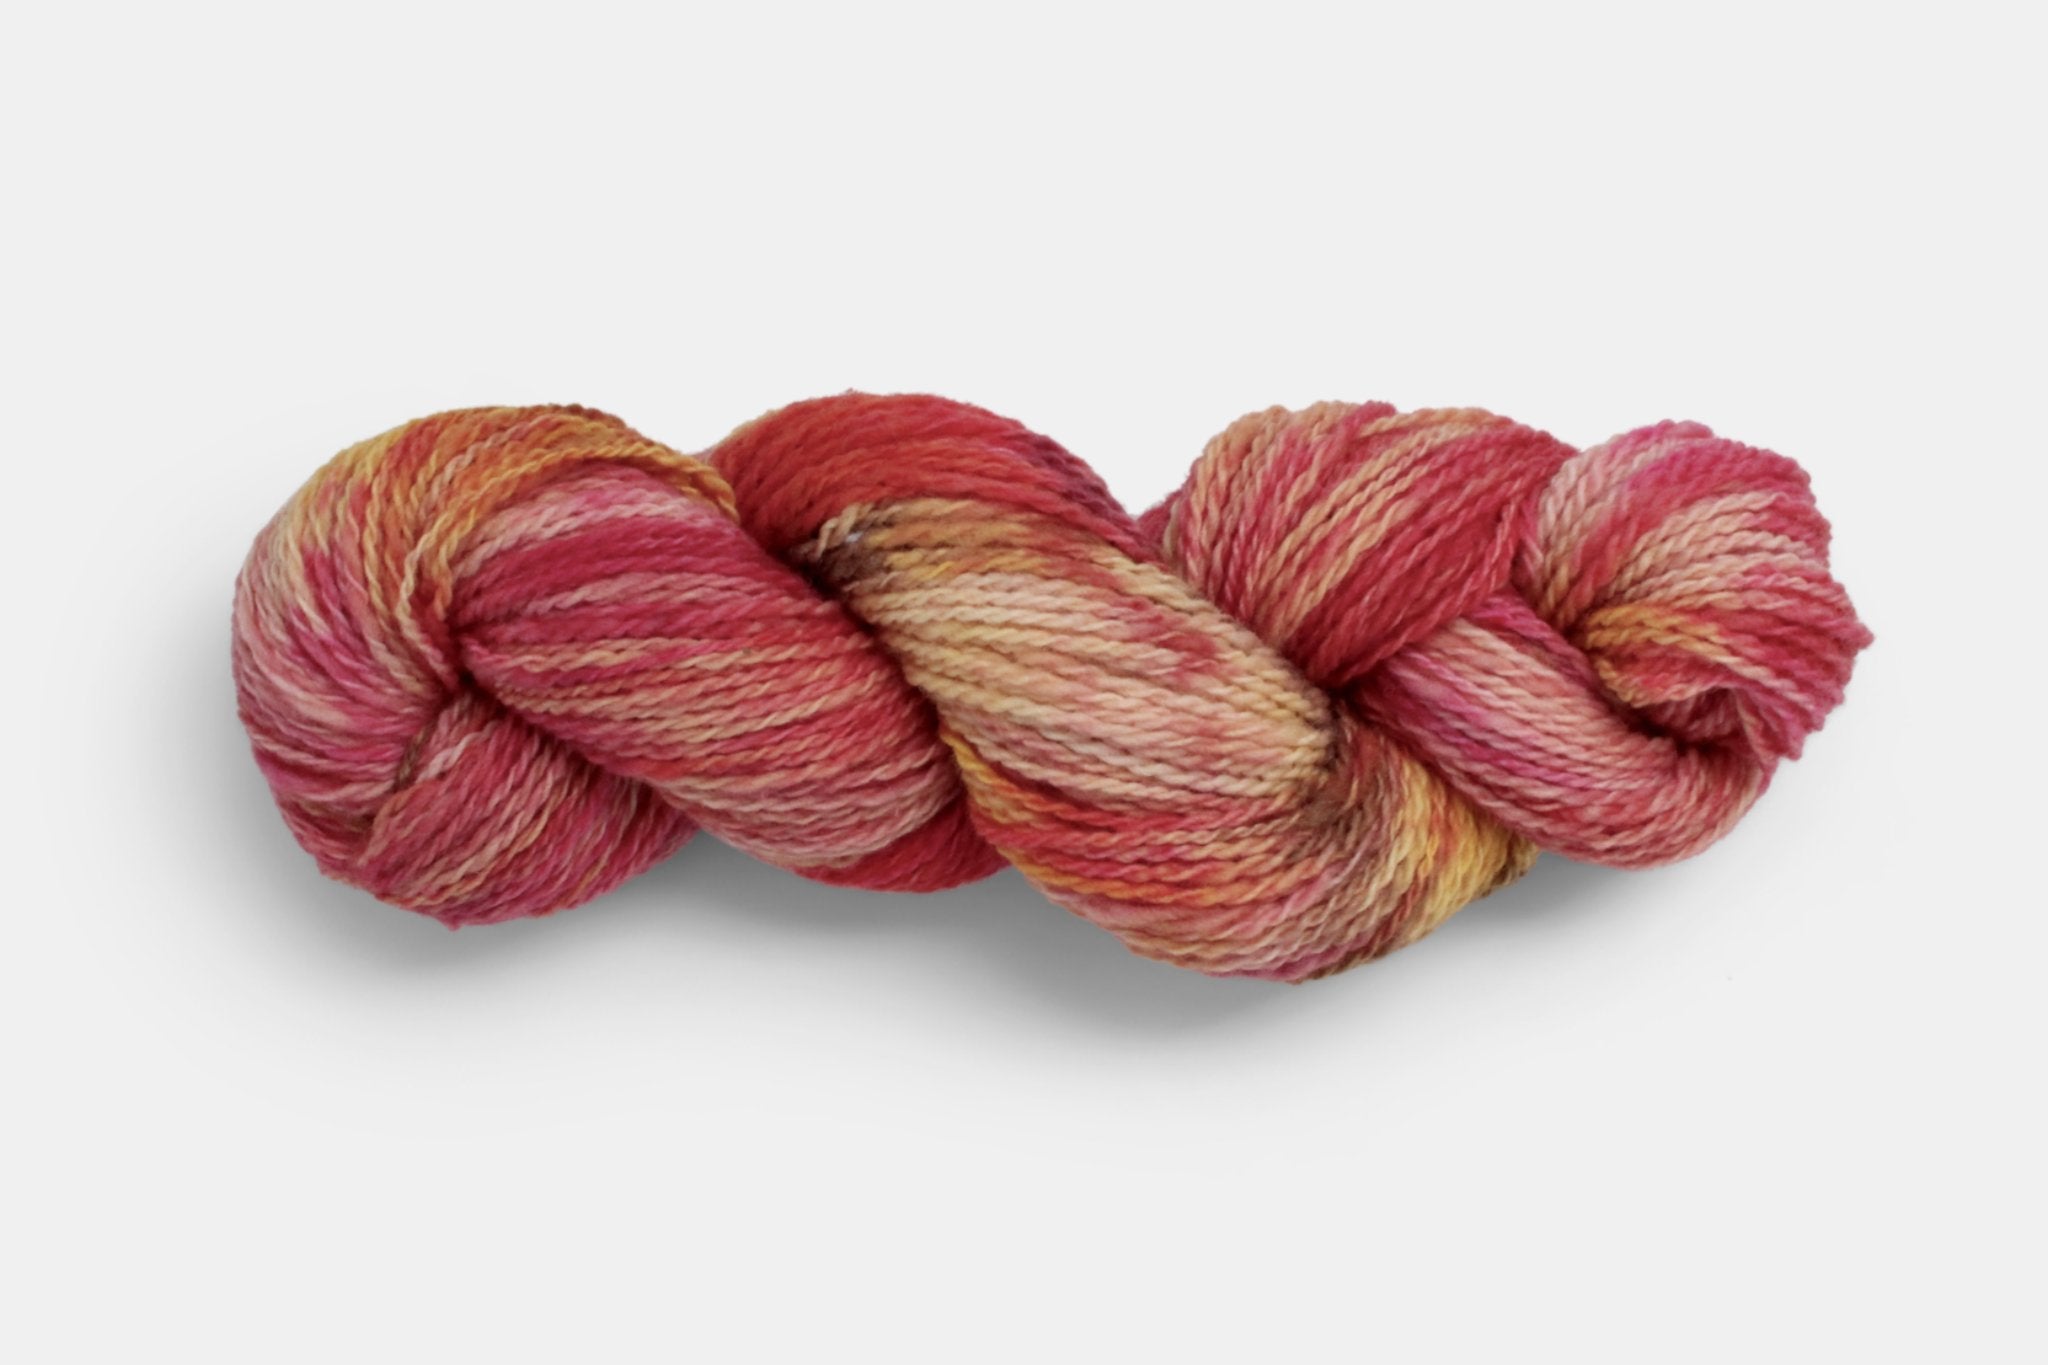 Fleece and Harmony Selkirk Worsted in Wild Rose